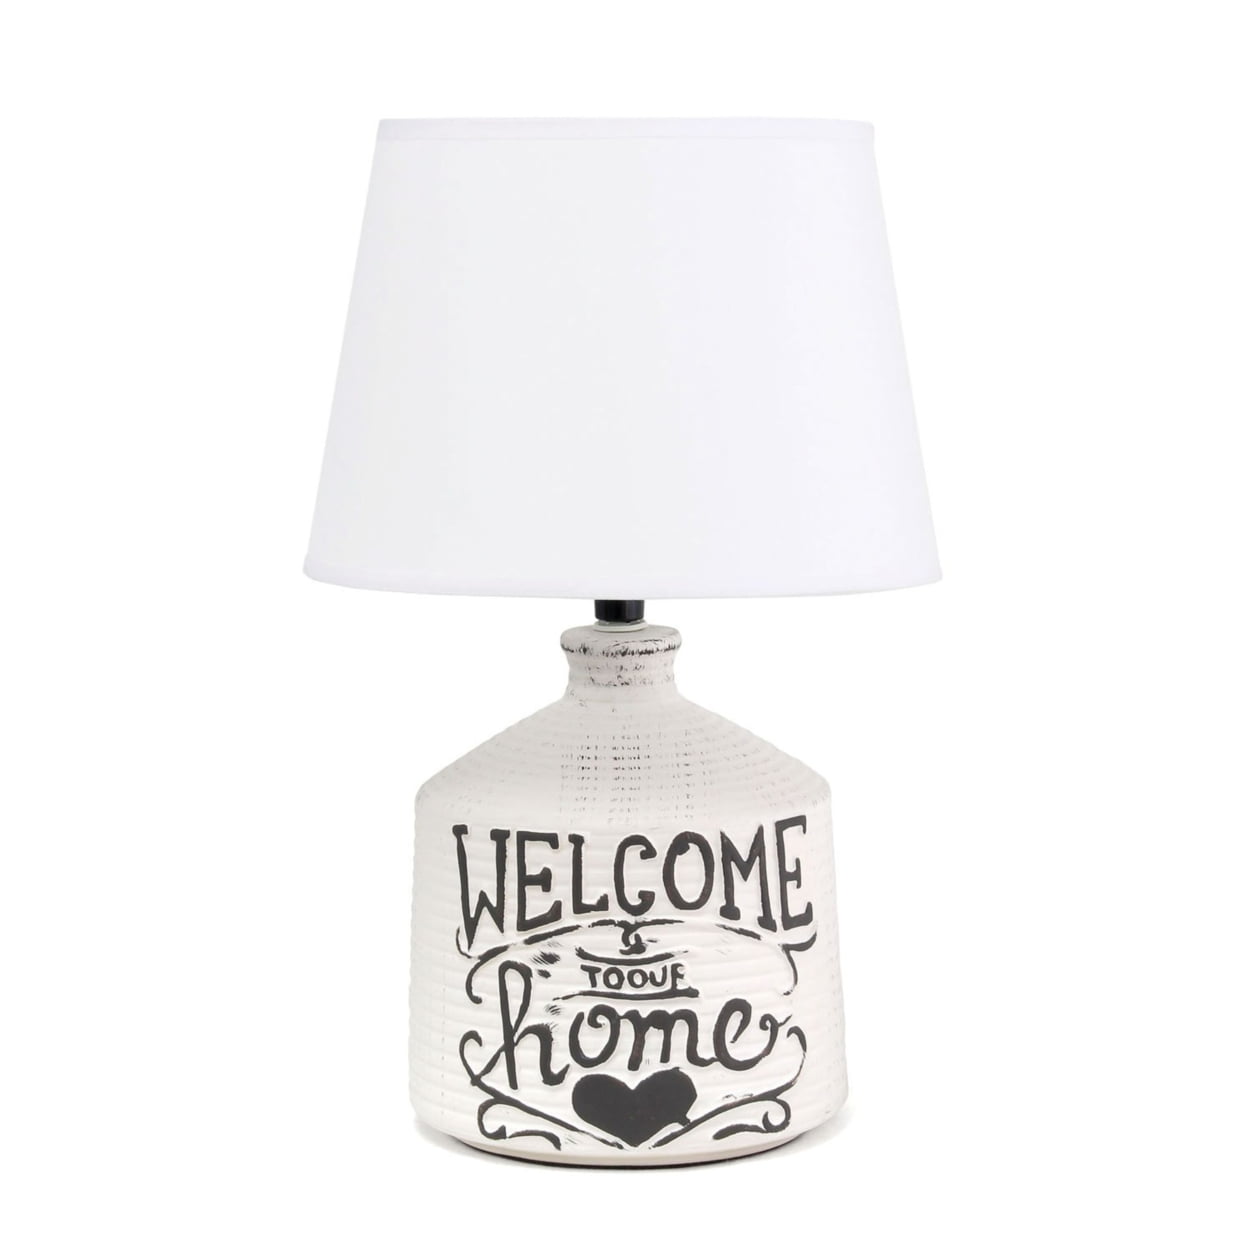 Lt1066-hme Welcome Home Rustic Ceramic Farmhouse Foyer Entryway Accent Table Lamp With Fabric Shade